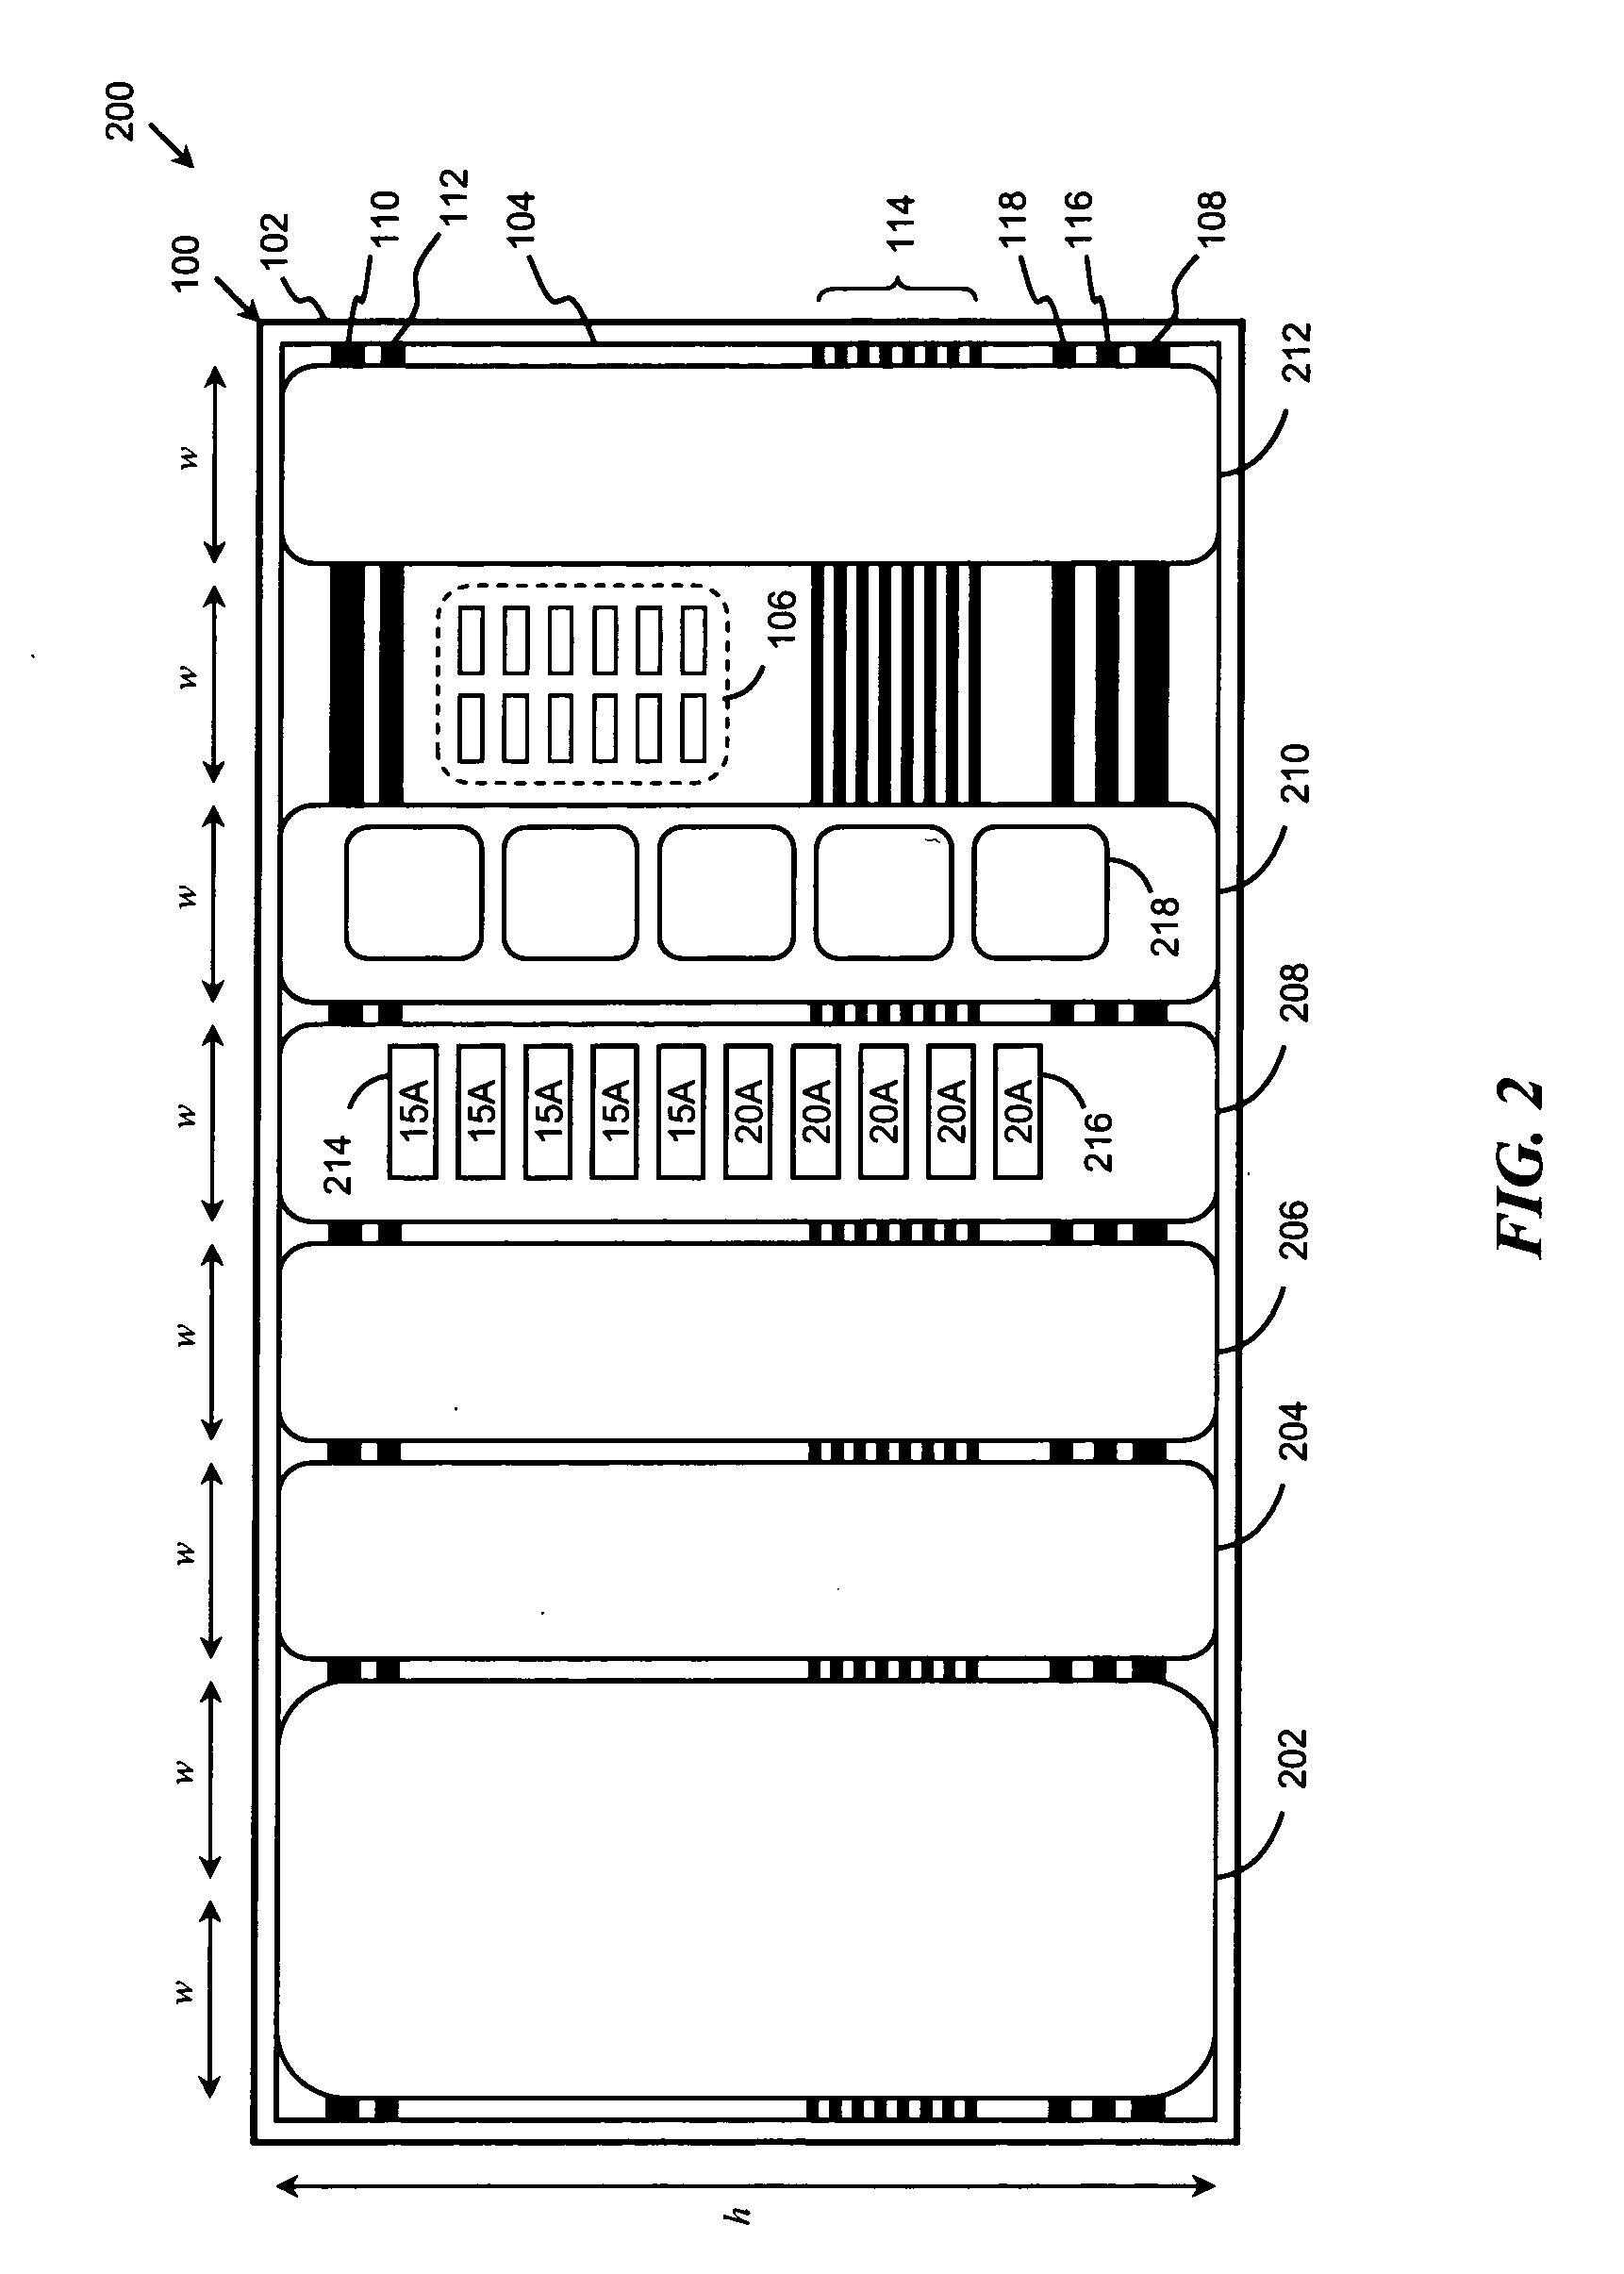 Modular, extensible electrical and communication systems, methods, and devices